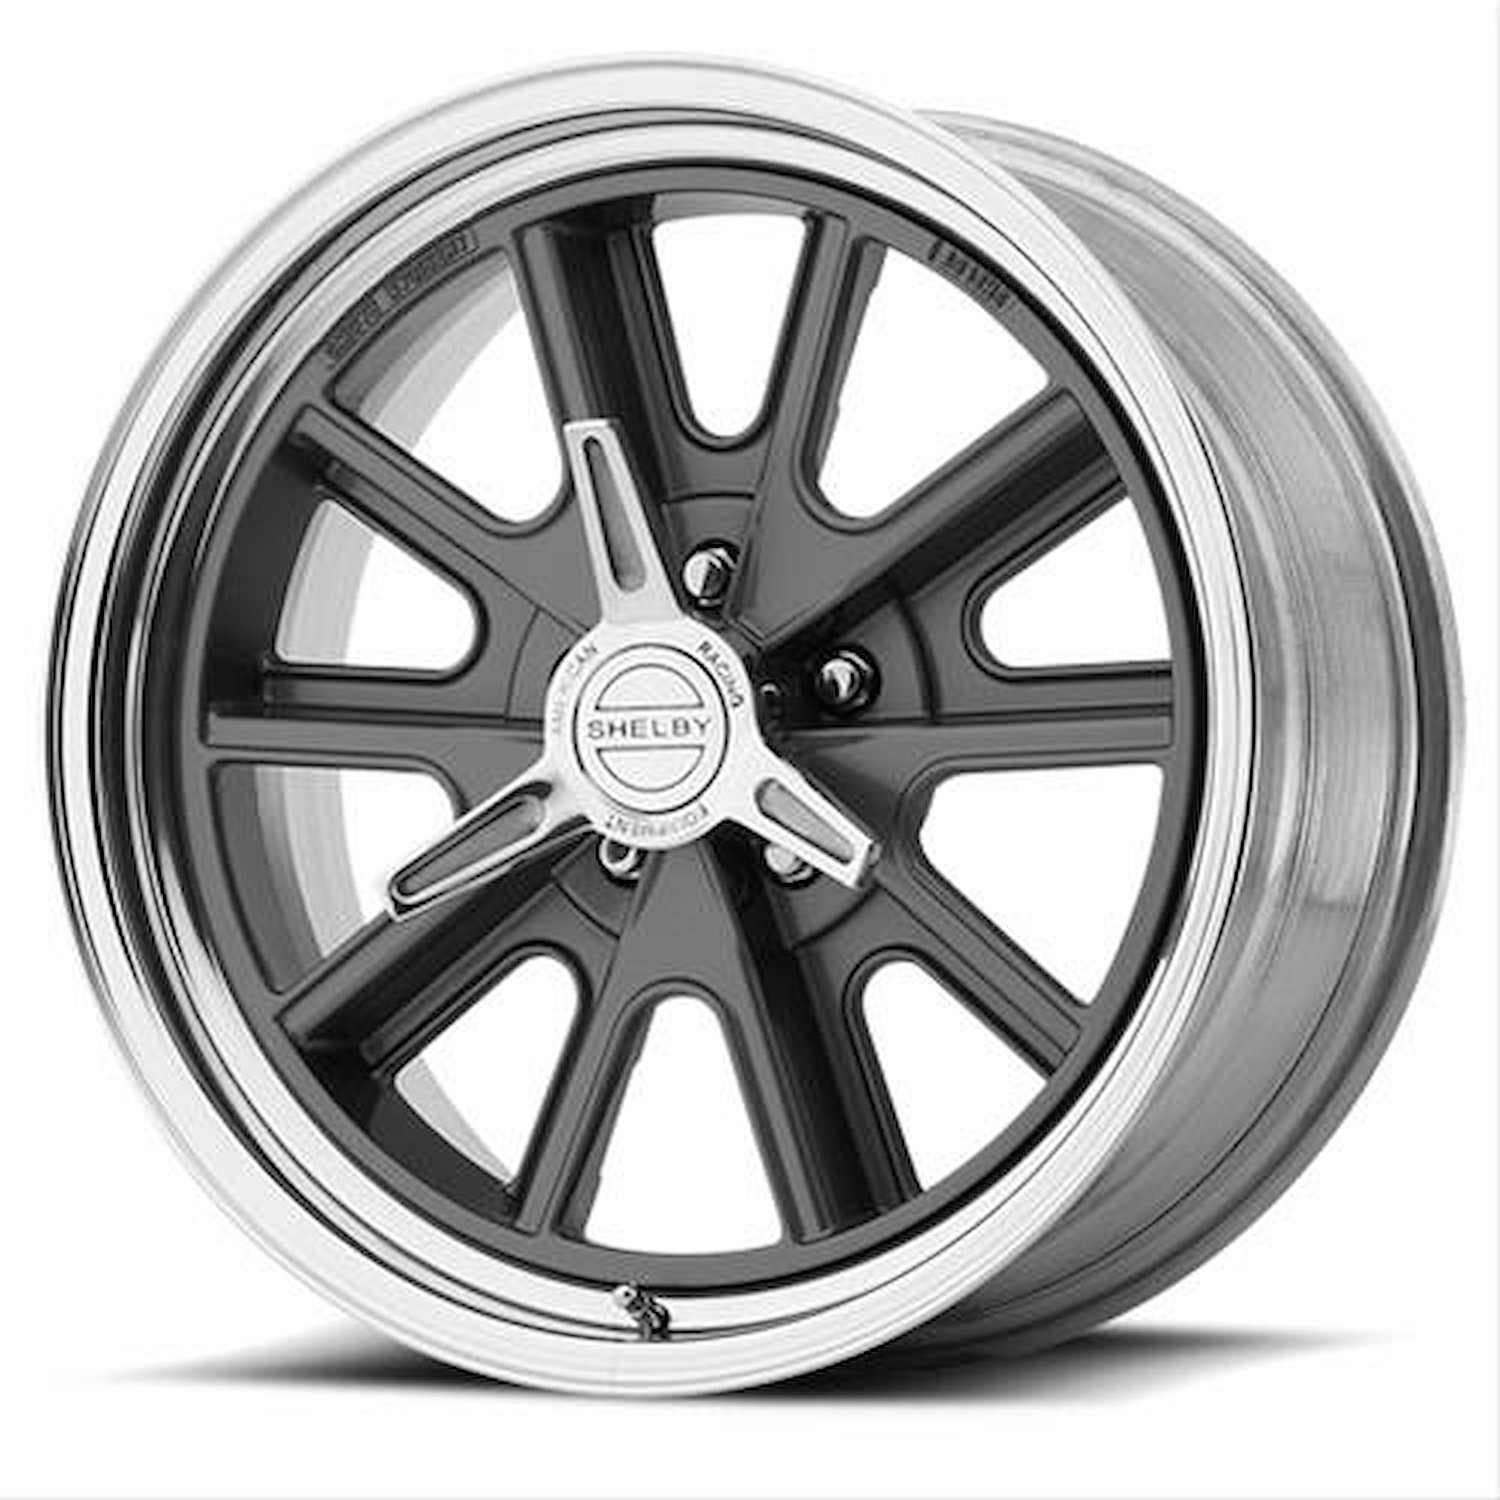 AMERICAN RACING 427 SHELBY COBRA TWO-PIECE MAG GRAY CENTER POLISHED BARREL 17 x 7 5x4.5 -12 3.53